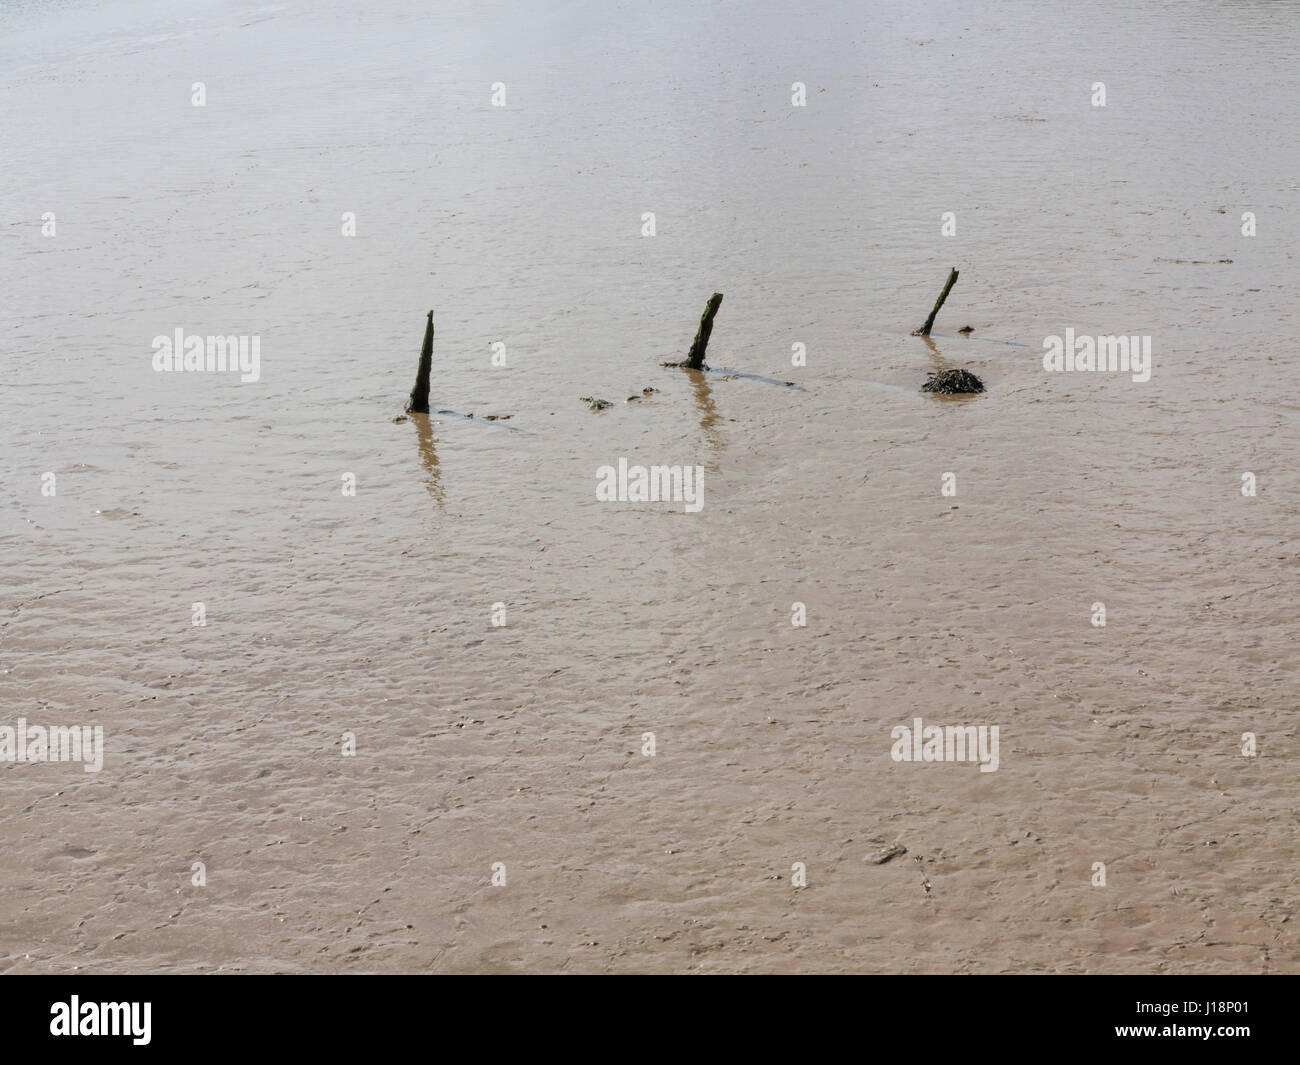 Three short thin eroded wooden posts partly sunken in the silt of a river estuary Stock Photo